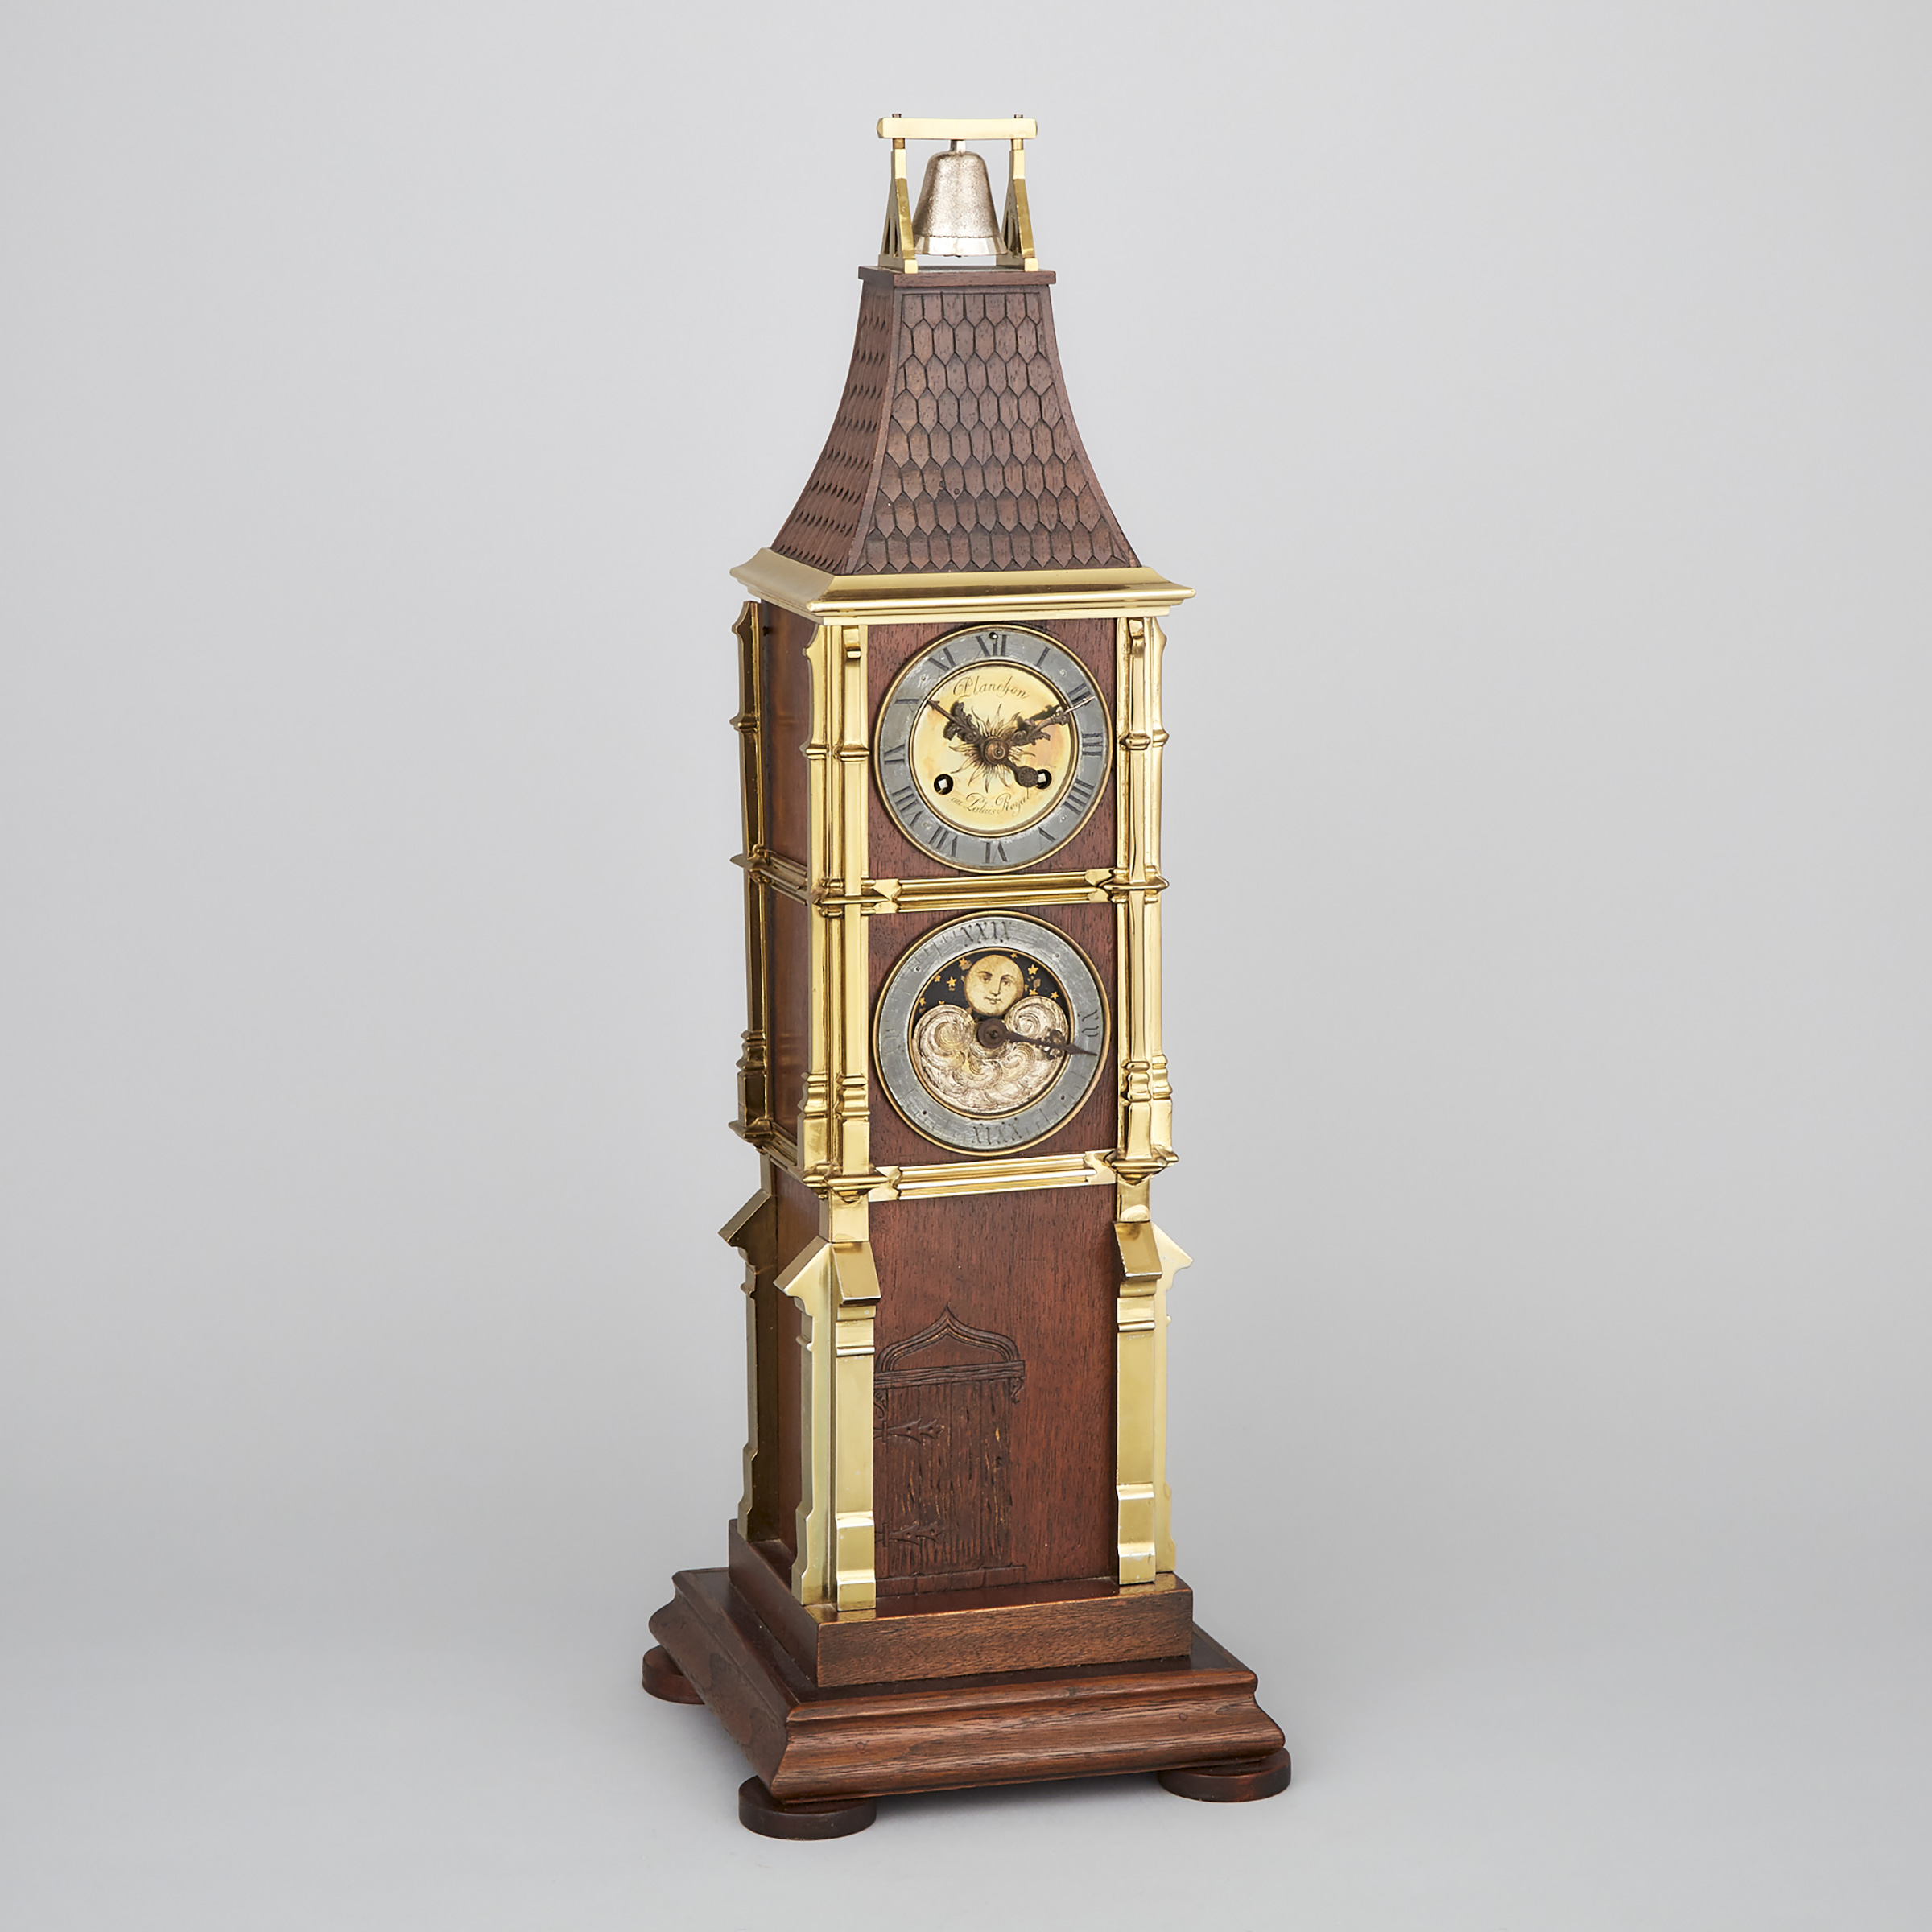 French Working Model of the Astronomical Tower Clock at Bourges Cathedral by Planchon au Palais Royal, Paris, early 20th century